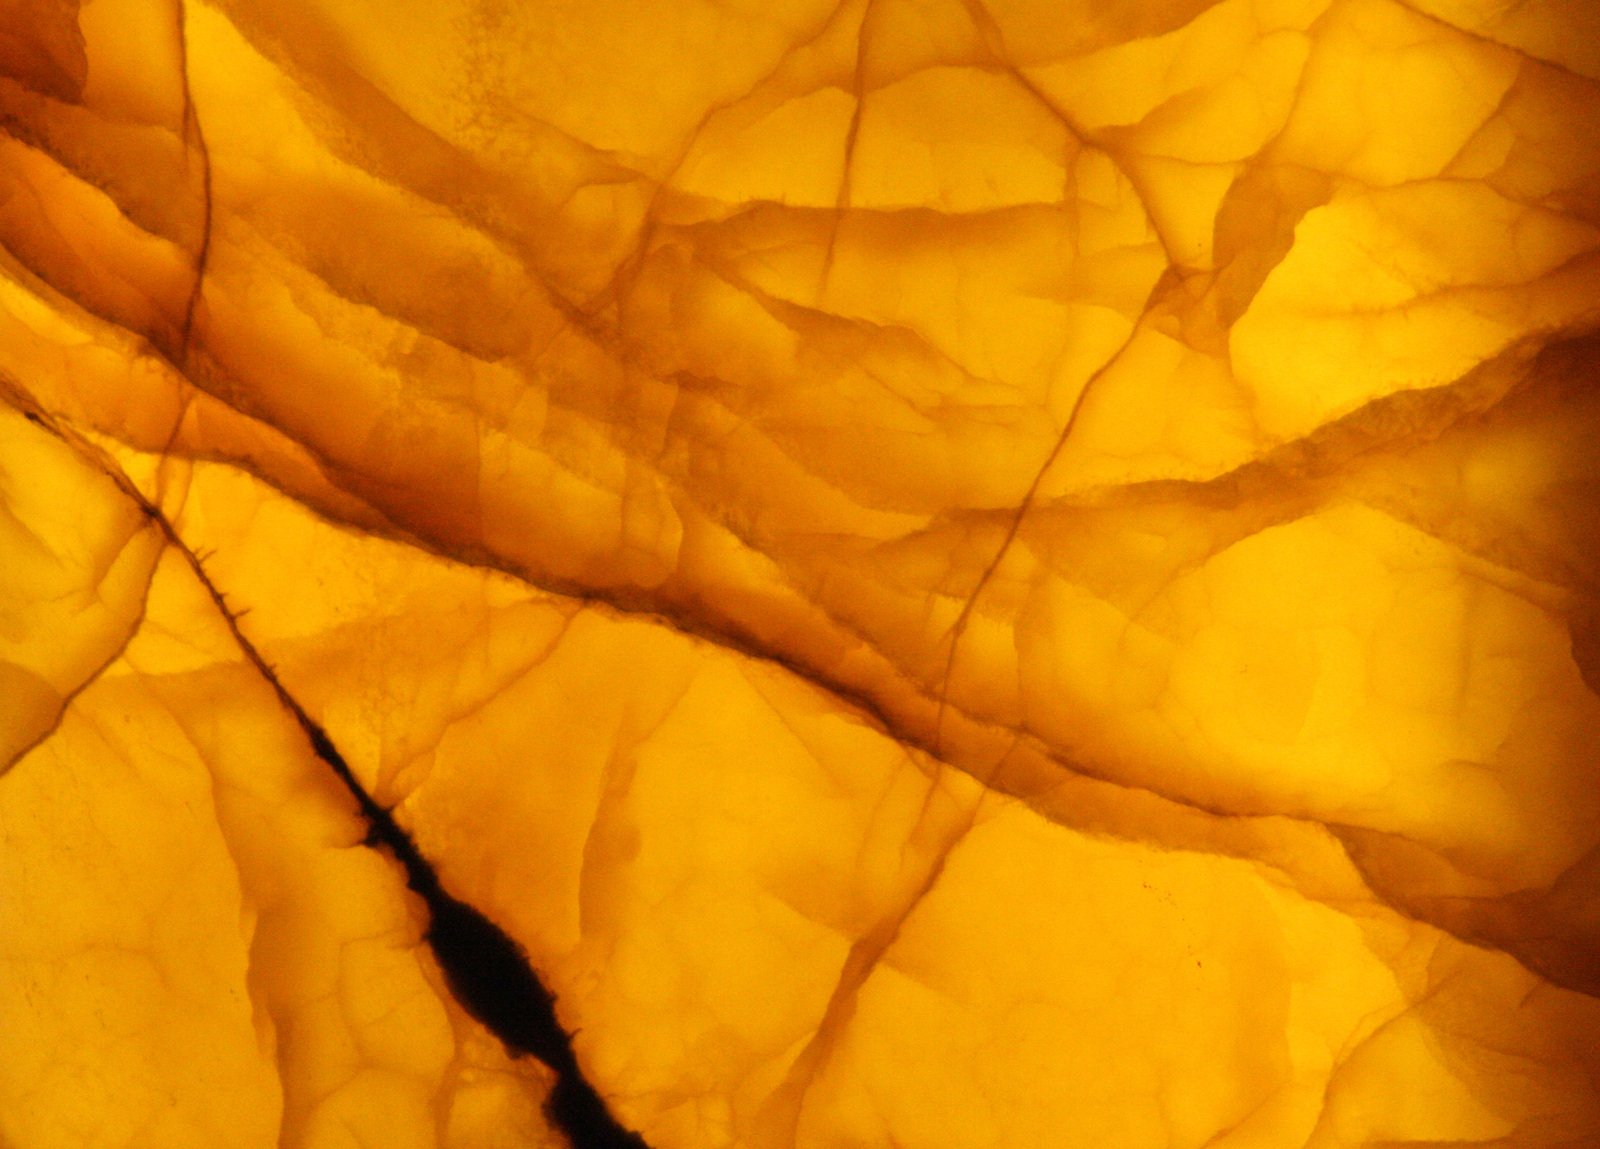 a close up view of yellow leaf showing light reflecting off the leaves